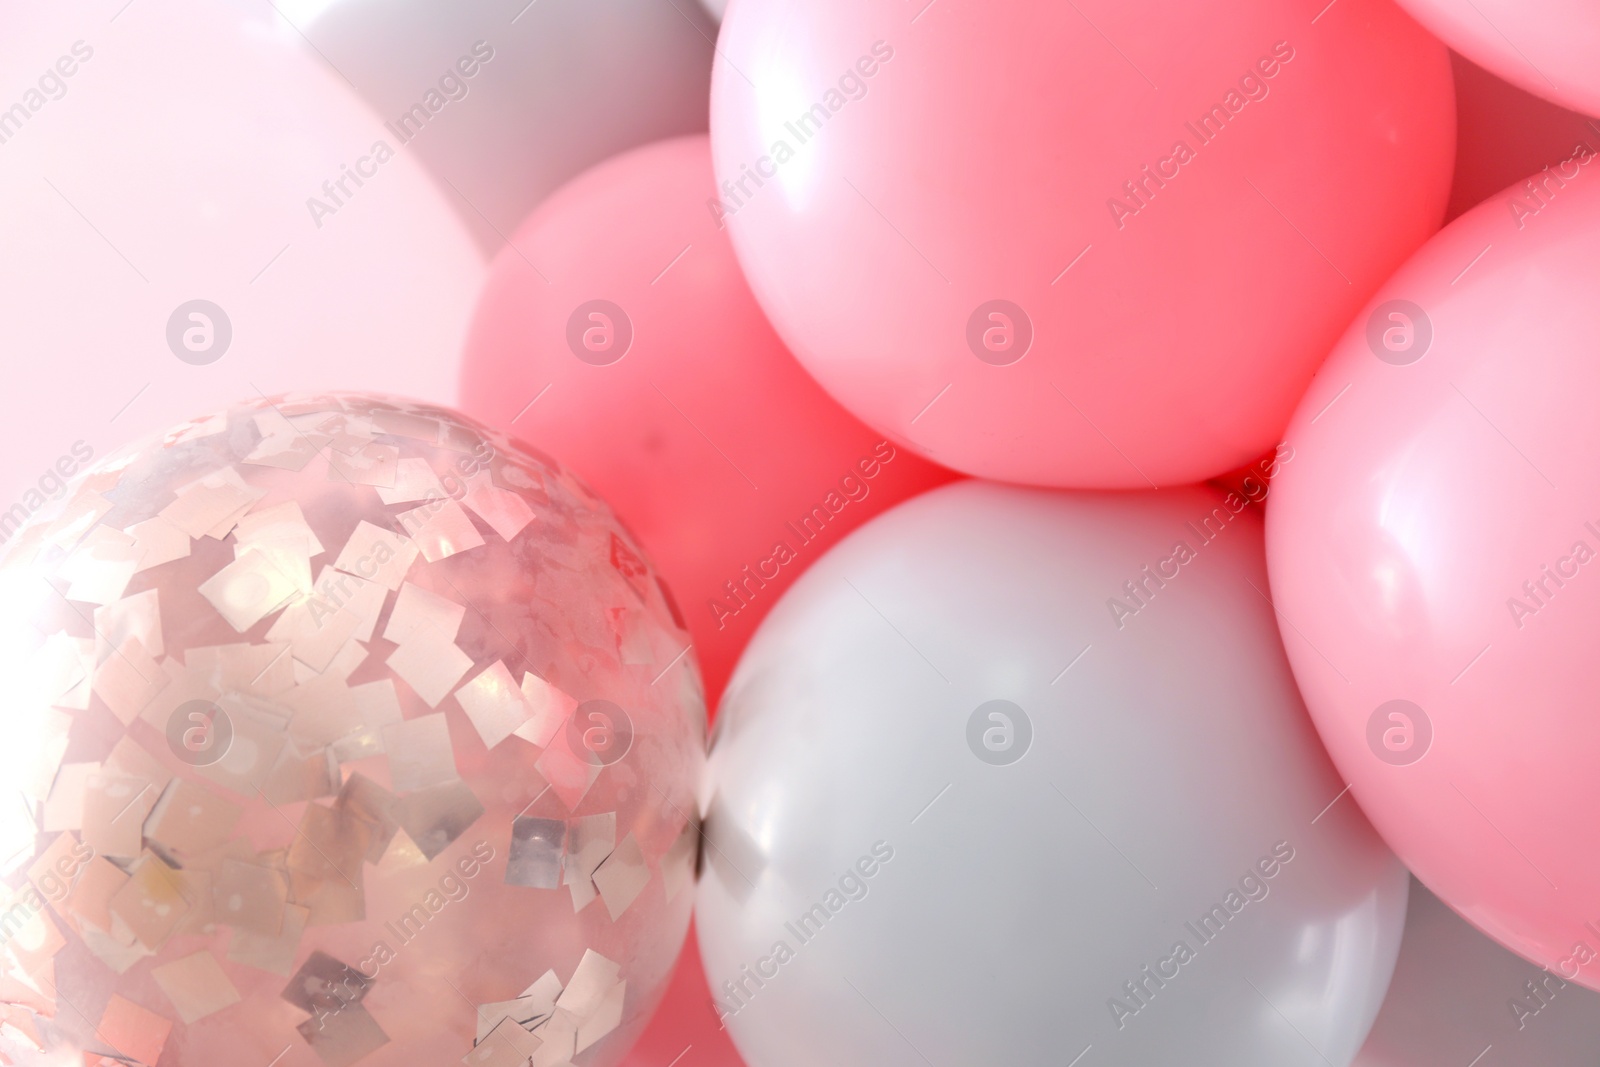 Photo of Beautiful colorful balloons as background, closeup view